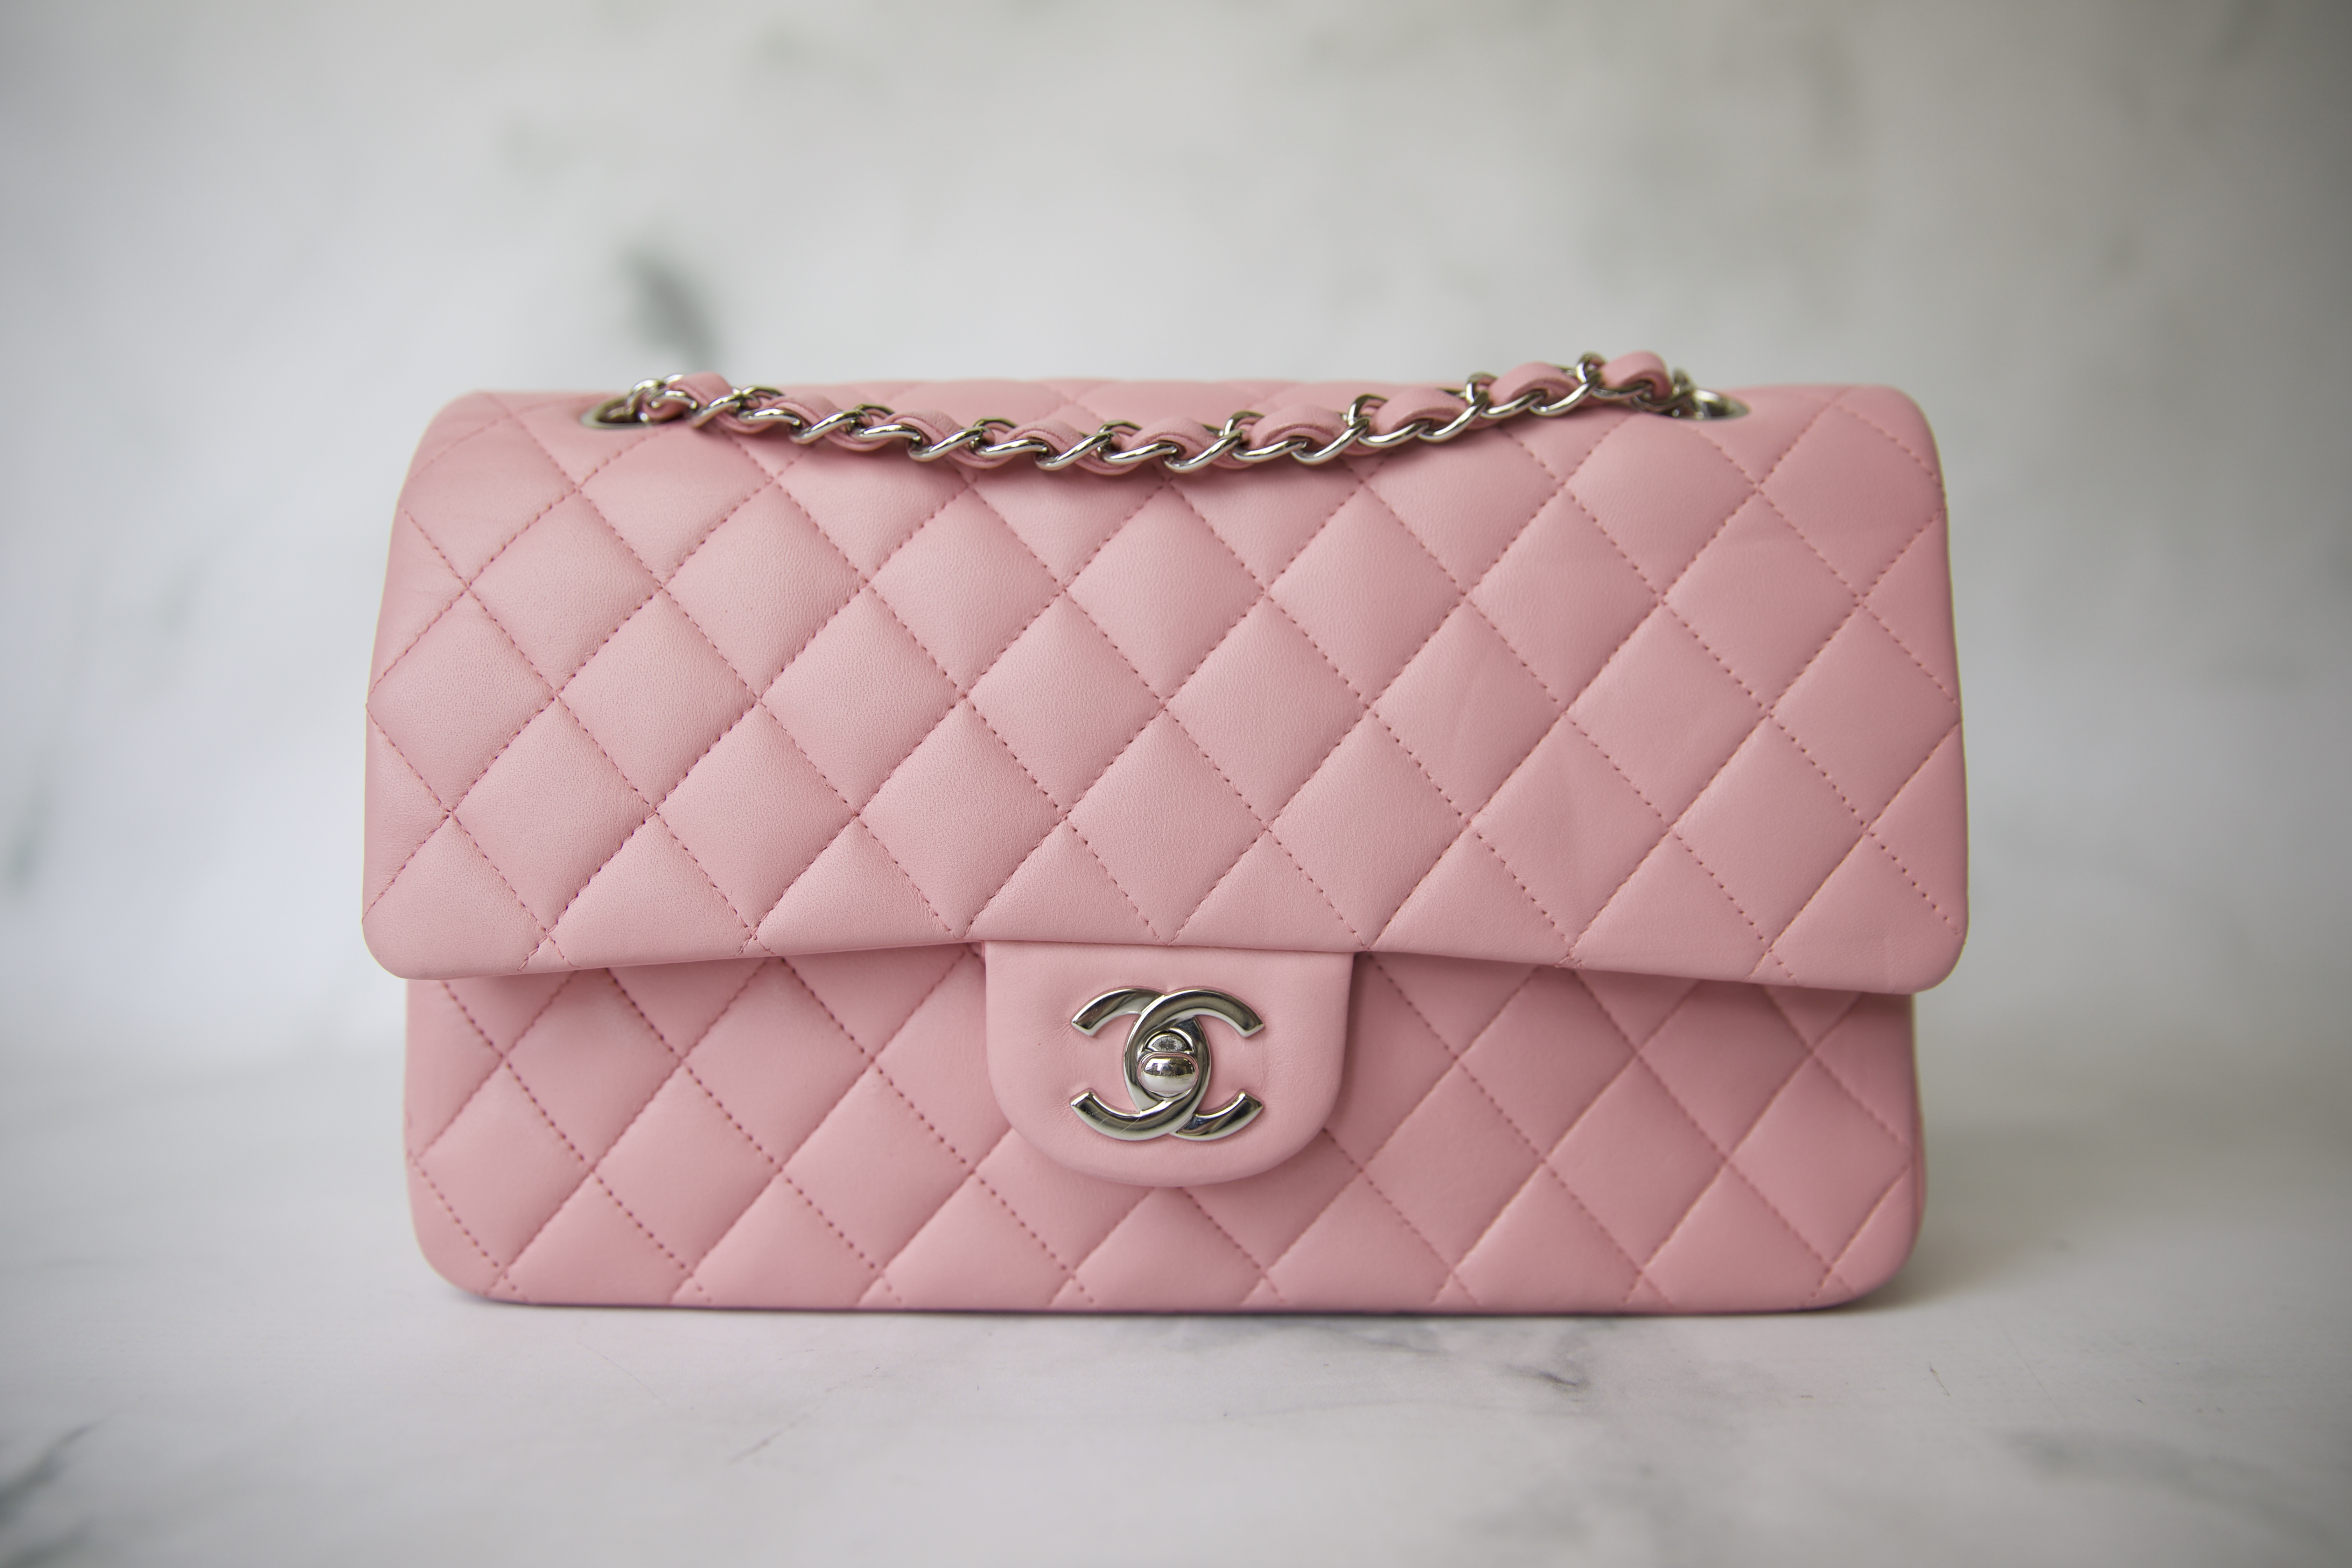 Chanel Metallic Pink And Rose Gold Lambskin Camellia Rose Appliqué